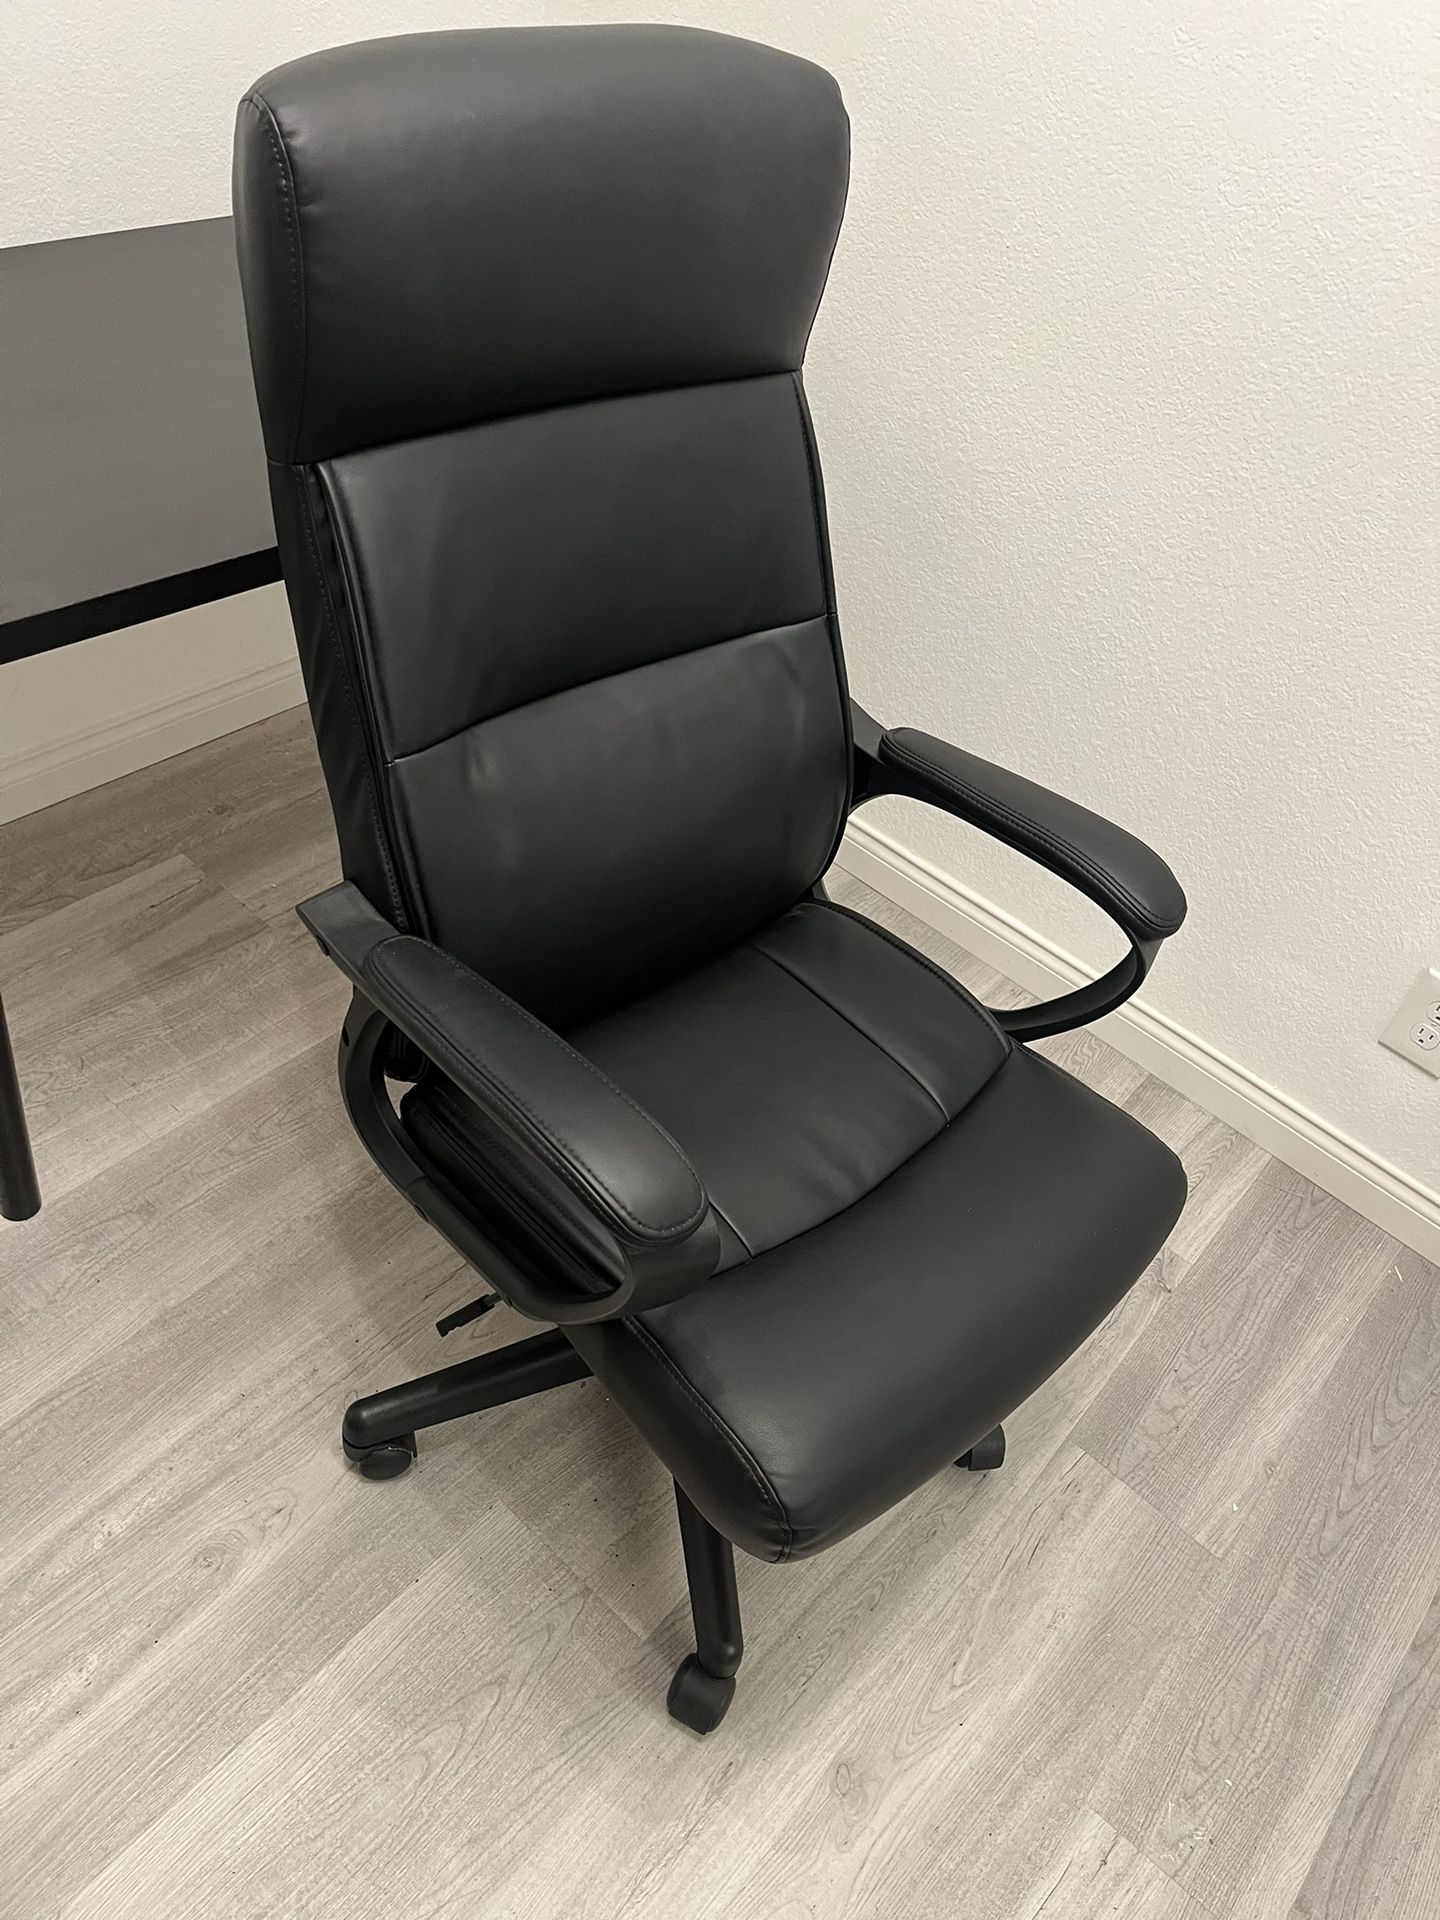 Office Chair And Desk $180